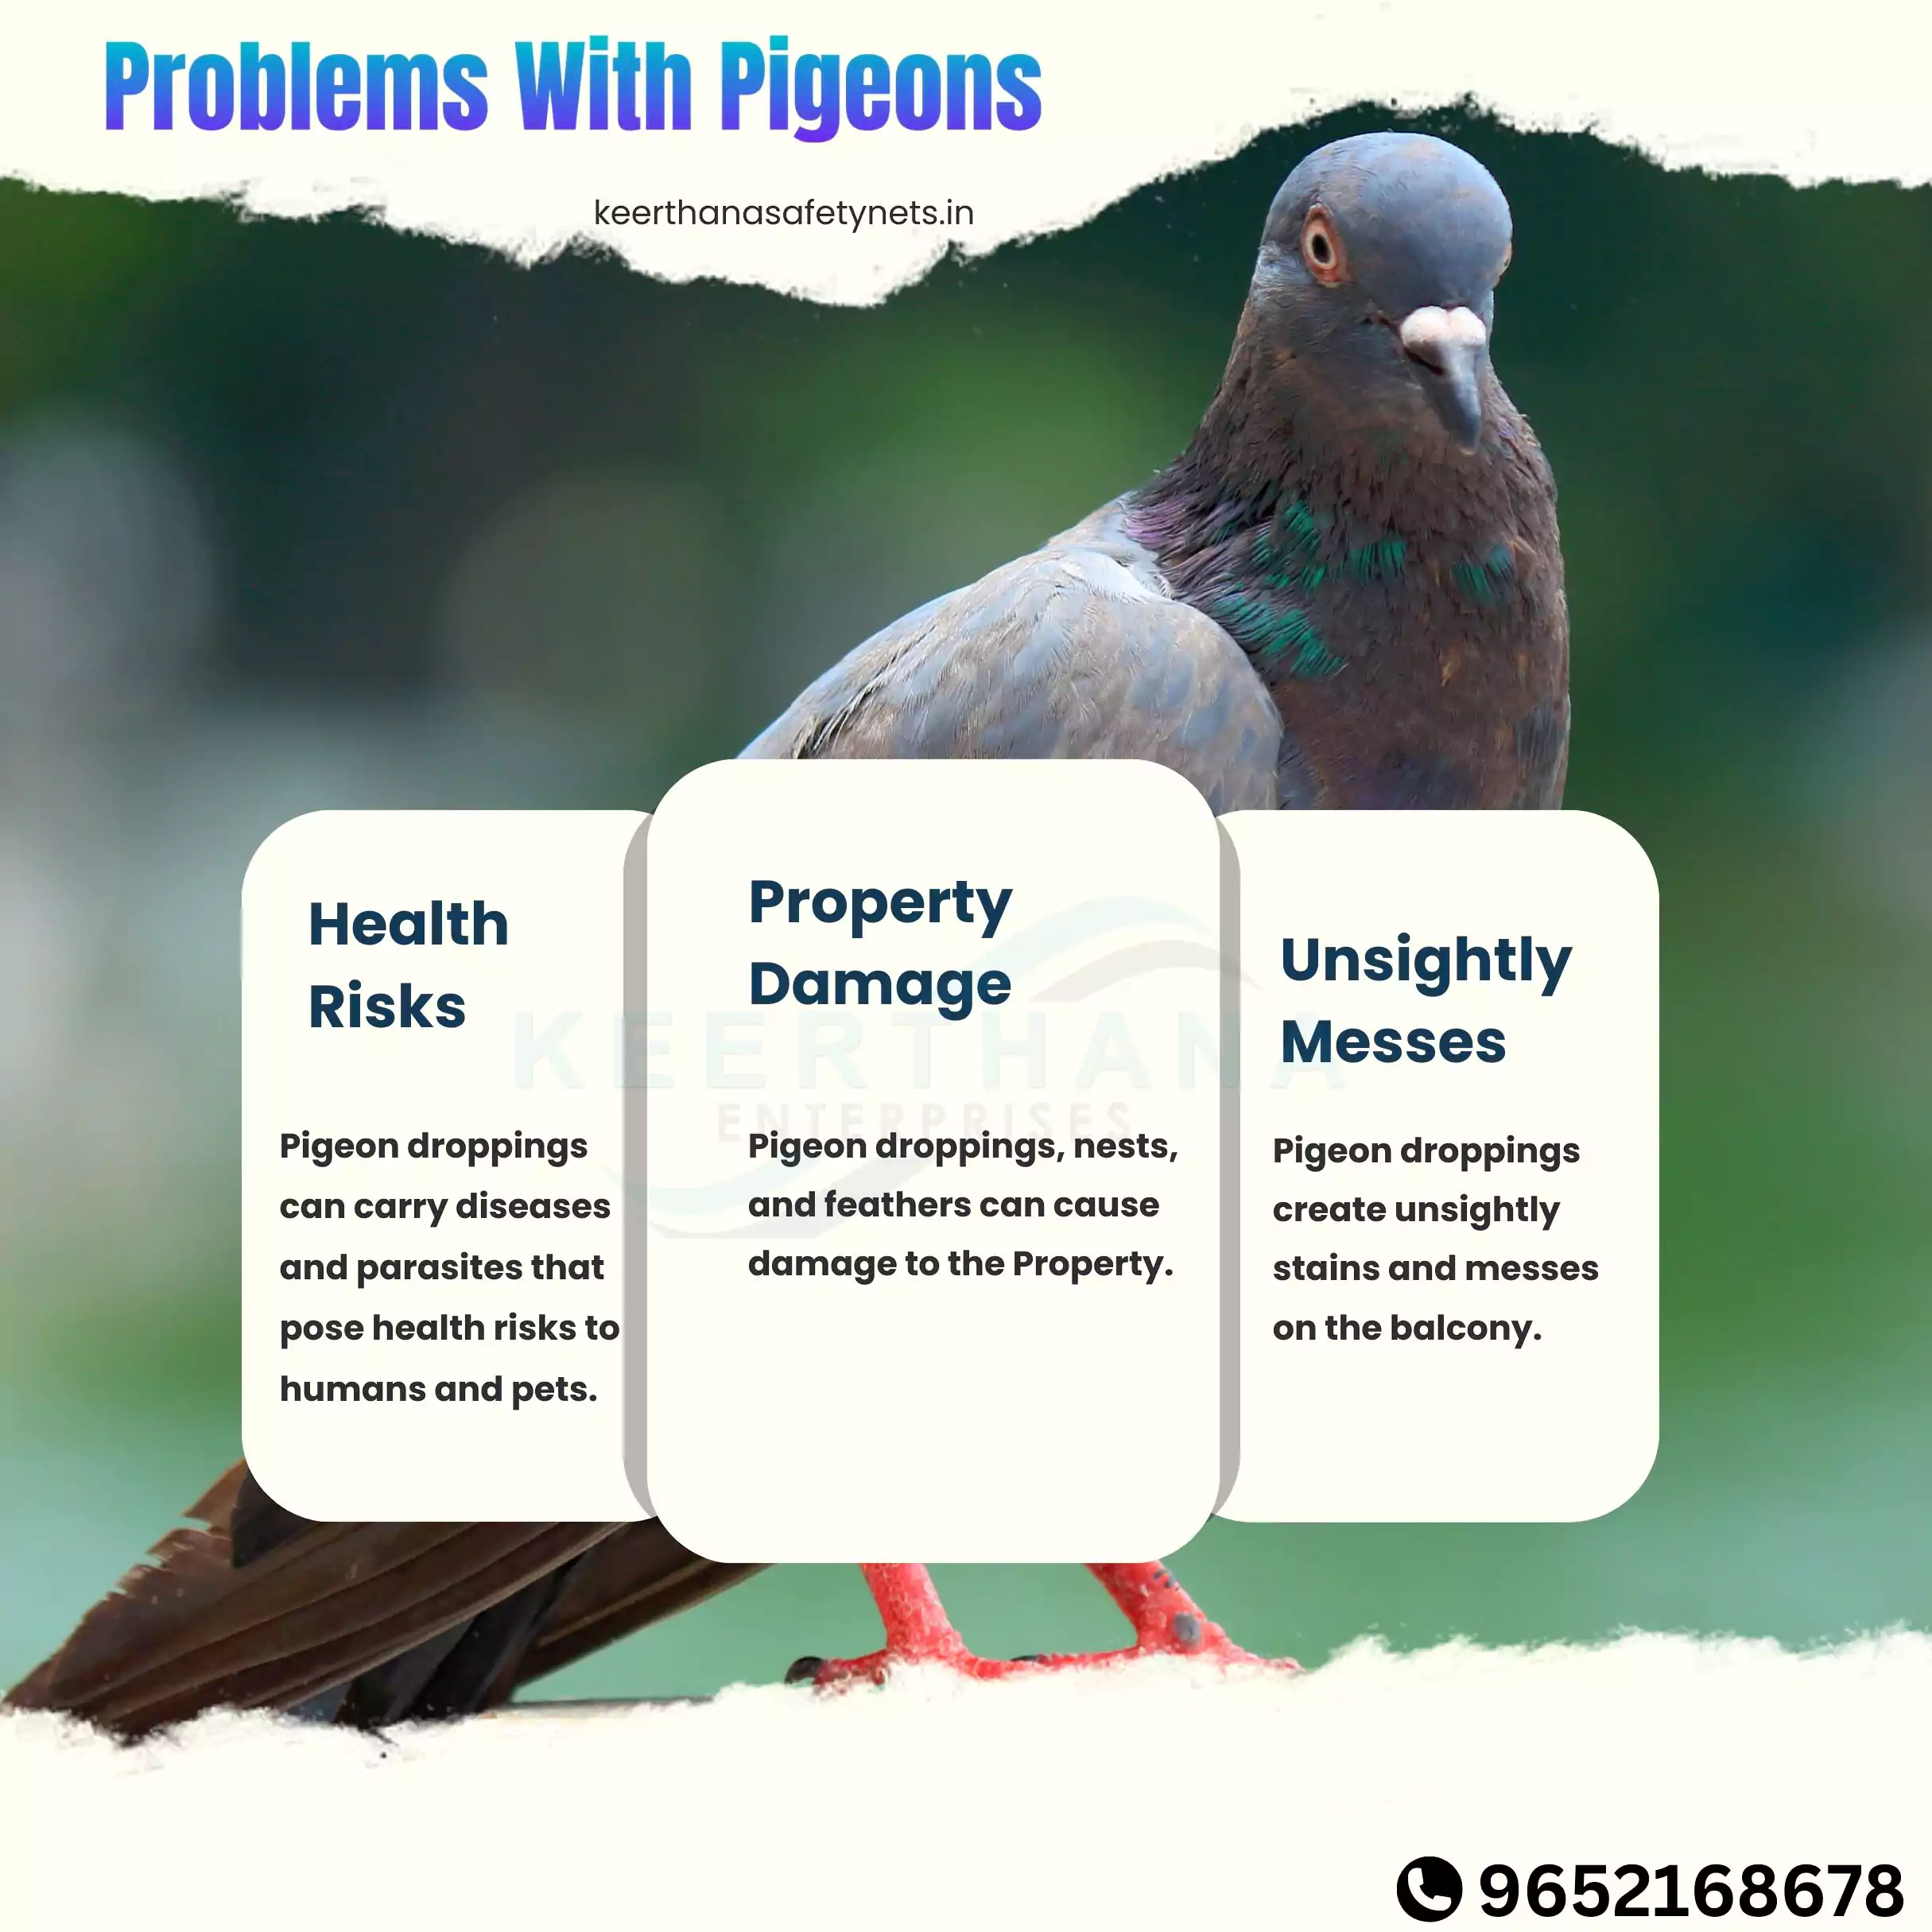 Problems Caused by Pigeons in Balconies